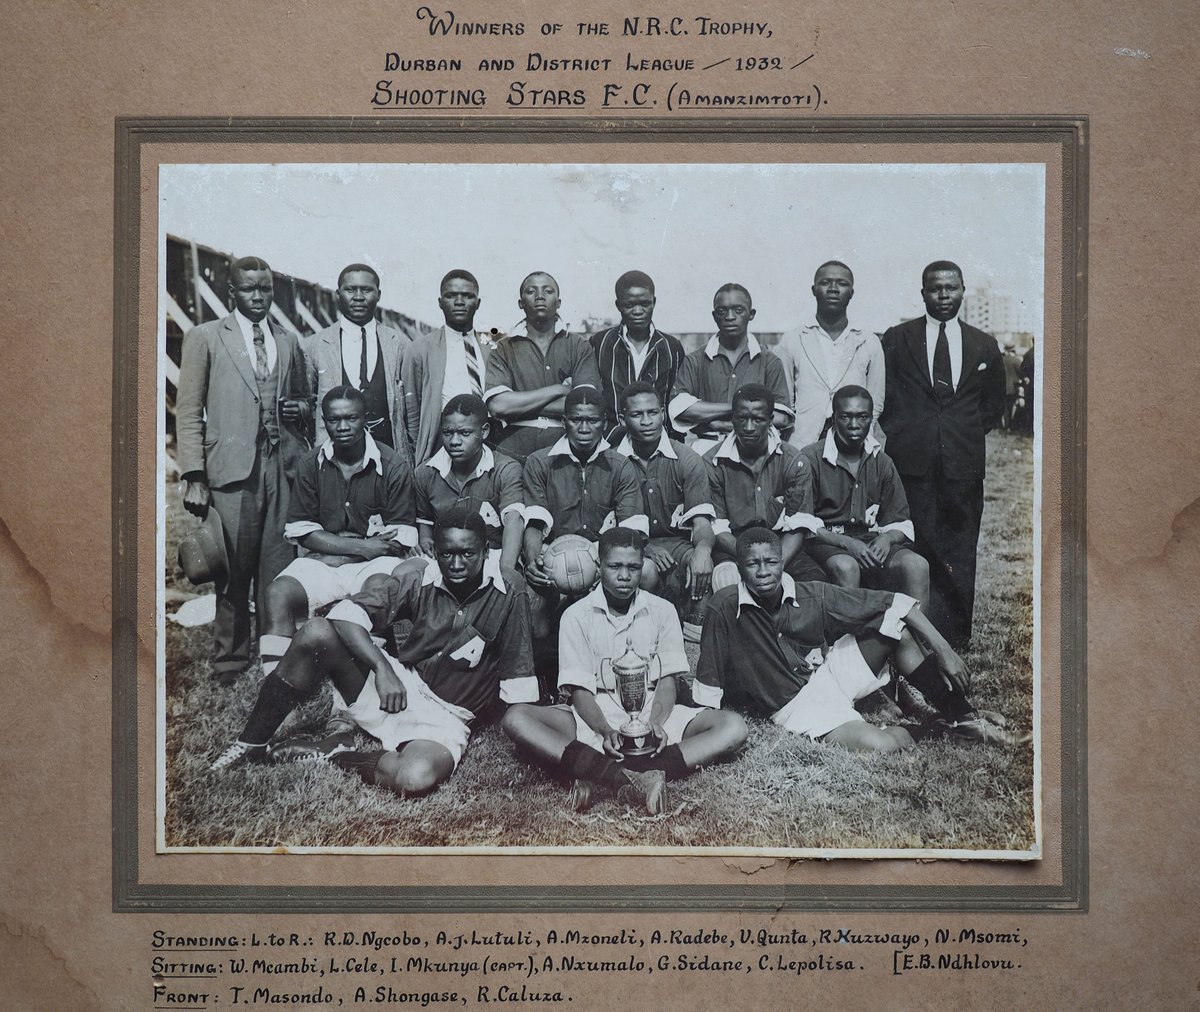 I'll start sharing a picture a day from my collection of (Southern) African history photos. Today: Albert John Luthuli as teacher and football organiser at Adams College near Durban, 1932. #africanhistorypics #luthuli #NobelPeacePrize #anc #SouthAfricanHistory. DM for hi res pics